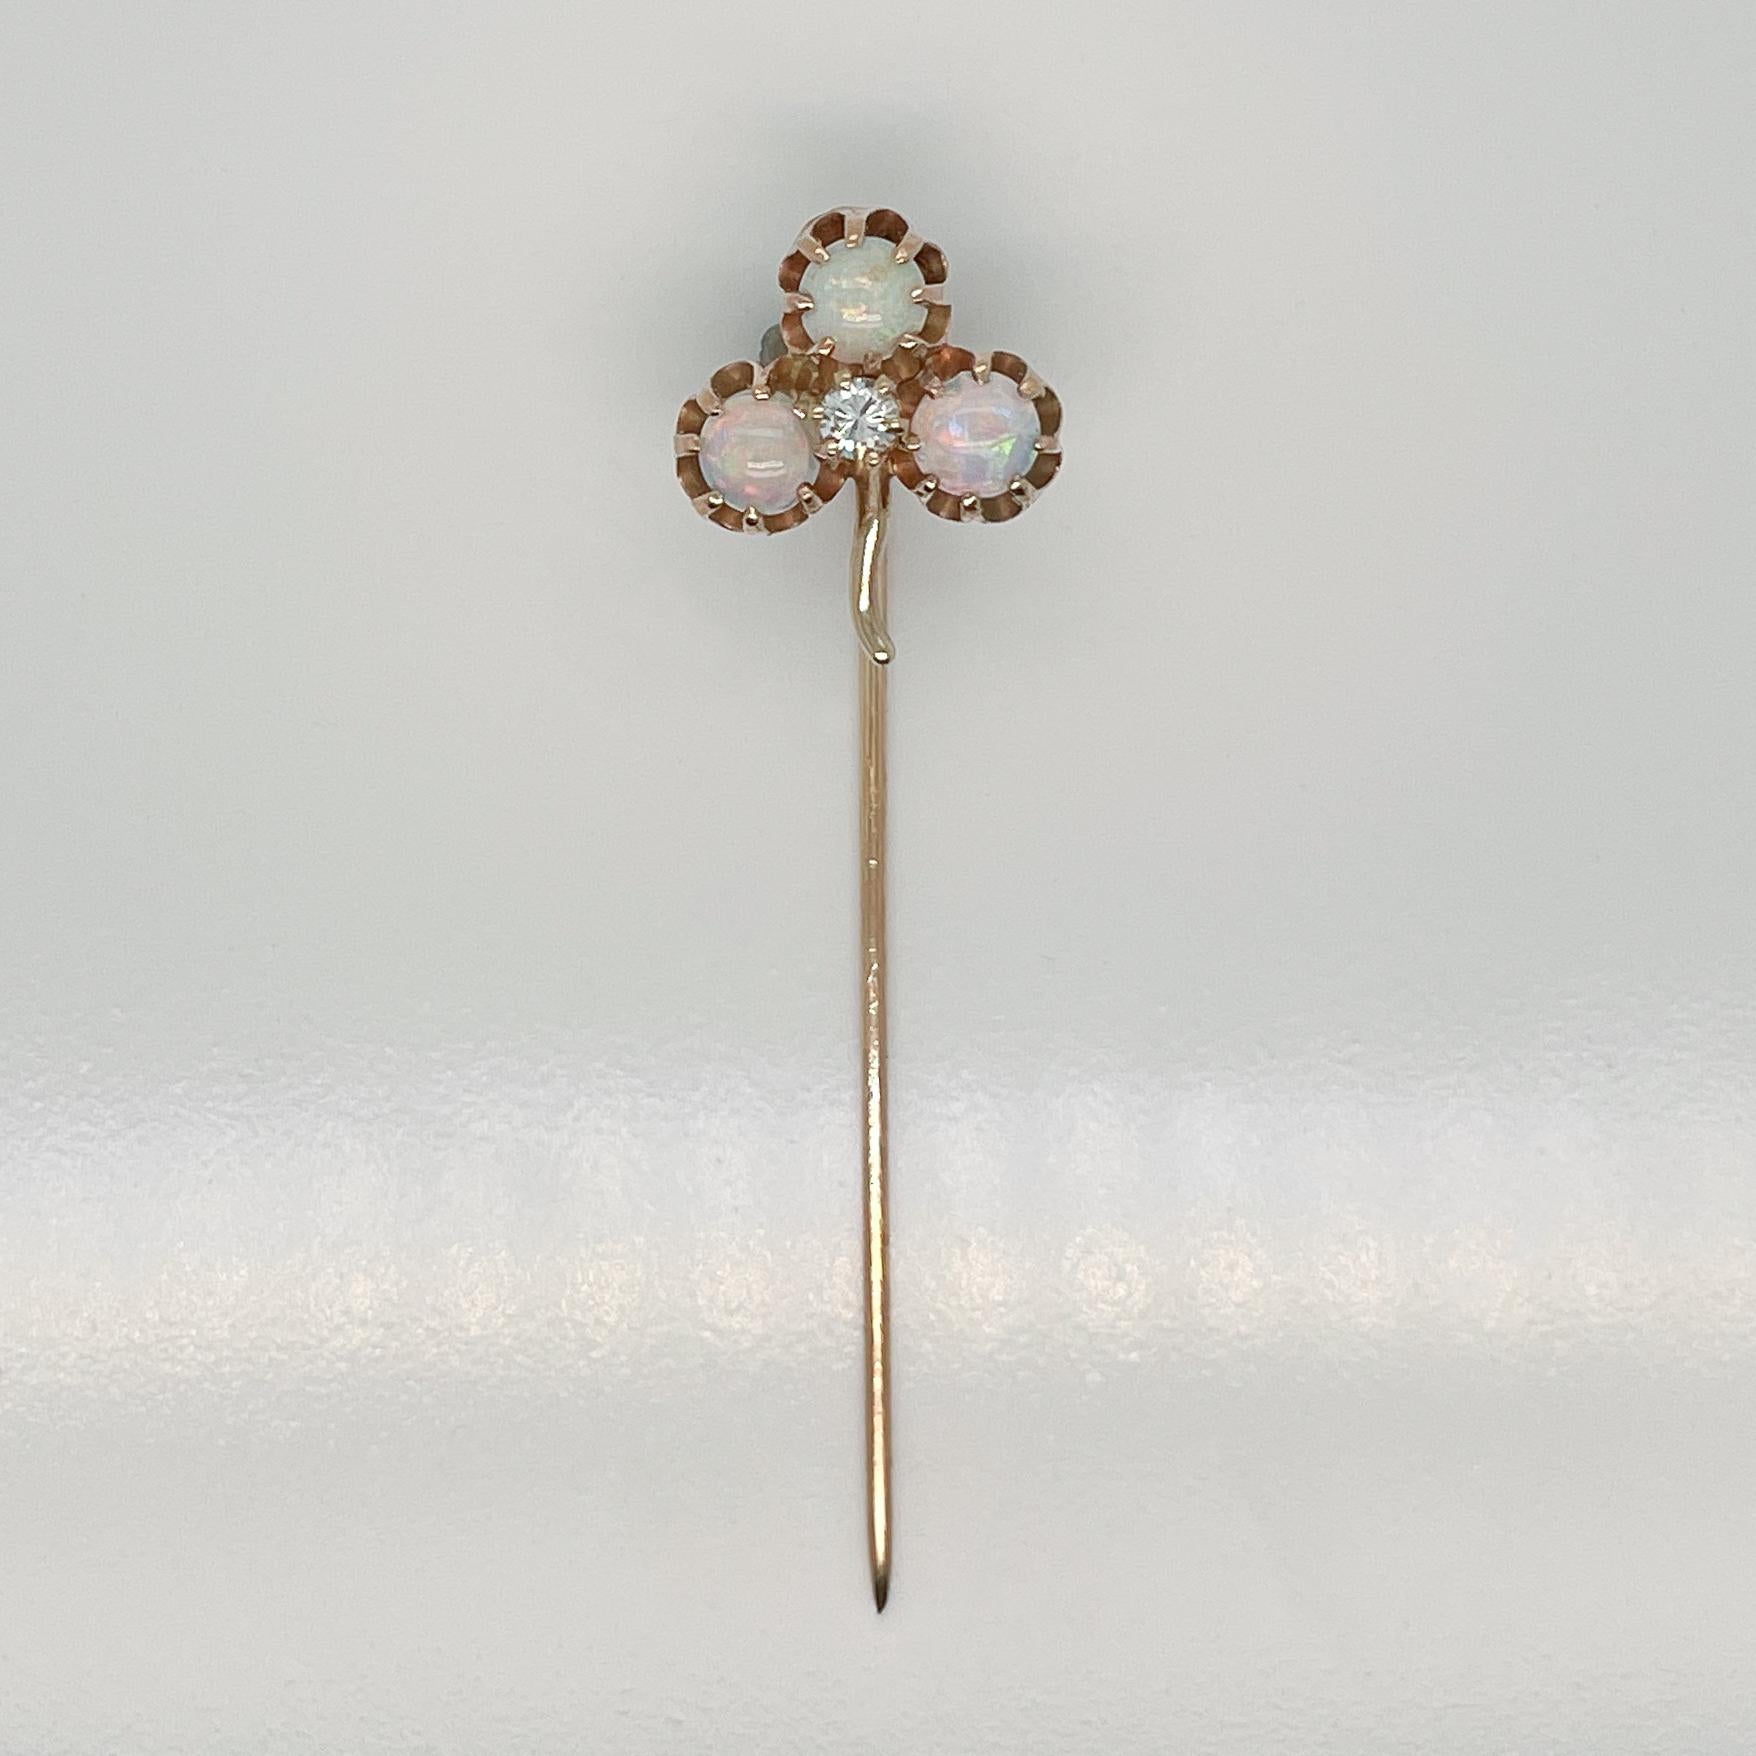 A very fine Edwardian 14k gold, opal and diamond stick pin.

With three opal cabochons prong set in 14k gold in a clover shape and a small round cut diamond is set at their center.

Simply a great stickpin!

Date:
19th Century

Overall Condition:
It